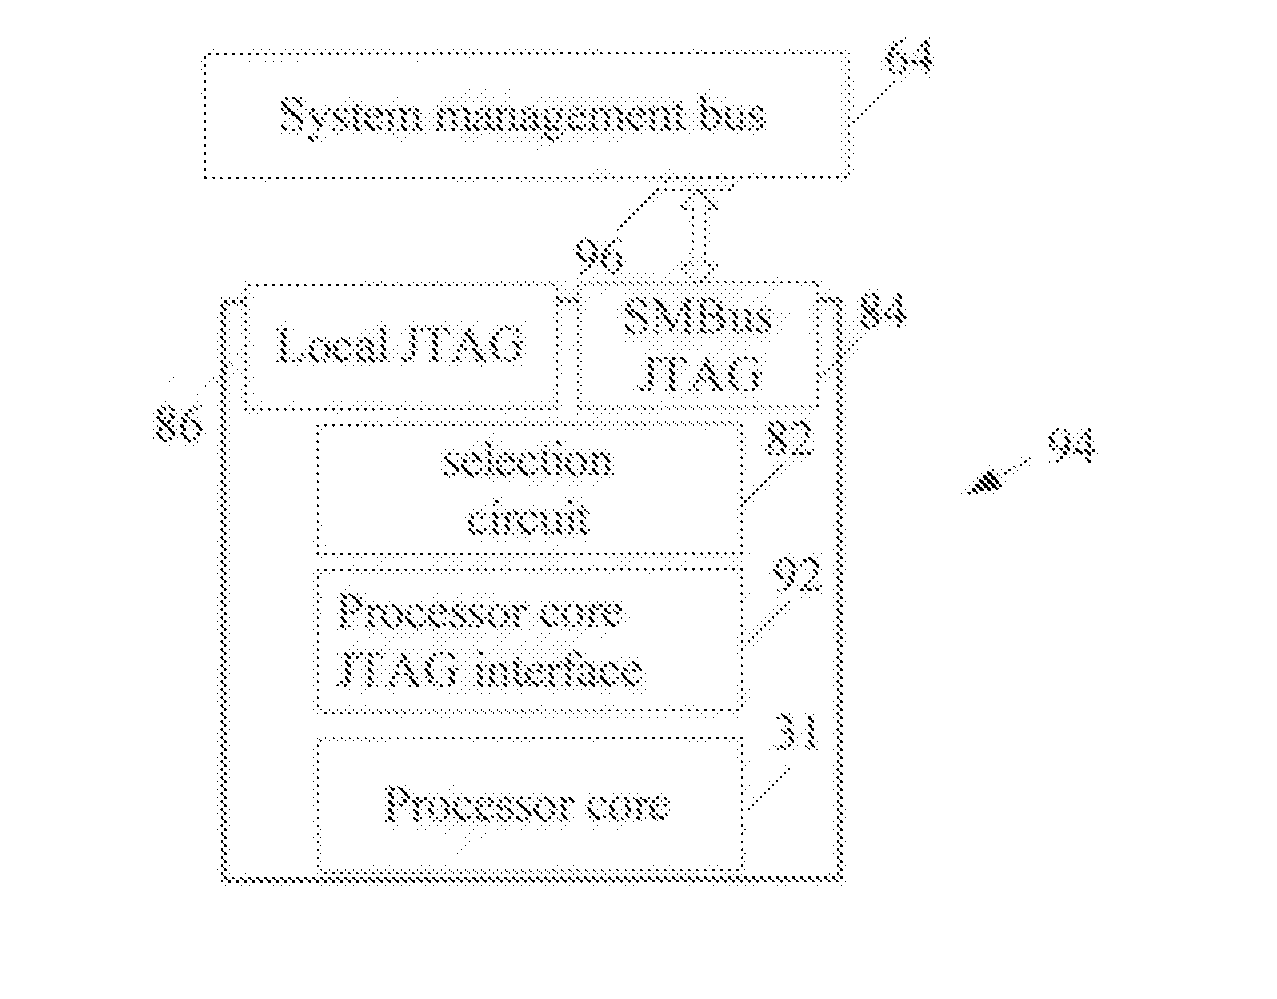 Distributed processor configuration for use in infusion pumps